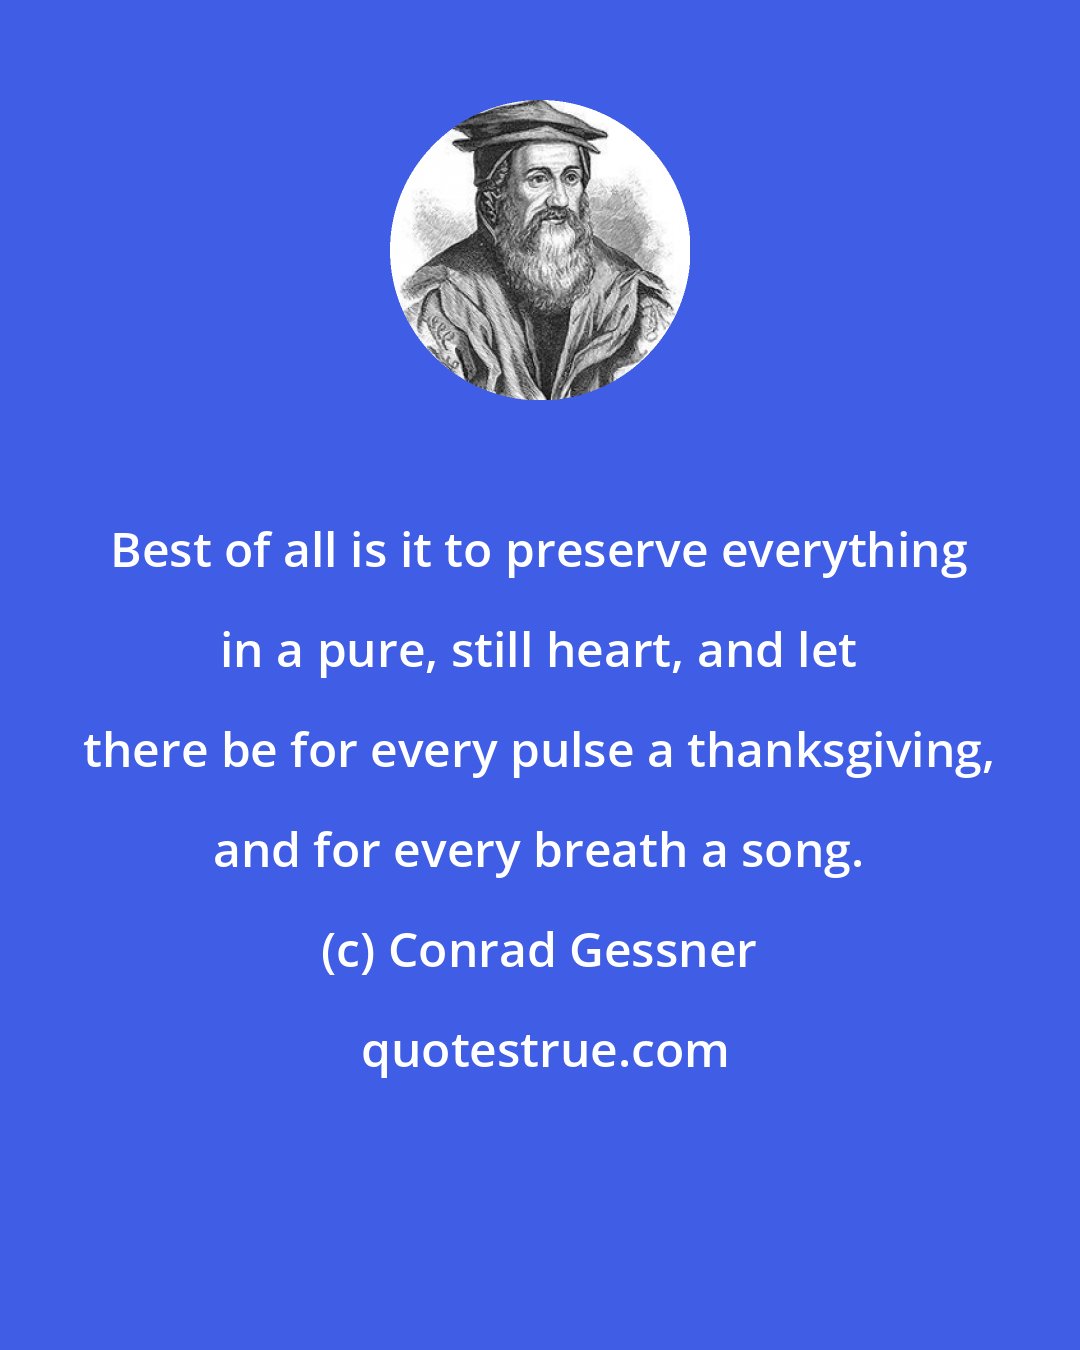 Conrad Gessner: Best of all is it to preserve everything in a pure, still heart, and let there be for every pulse a thanksgiving, and for every breath a song.